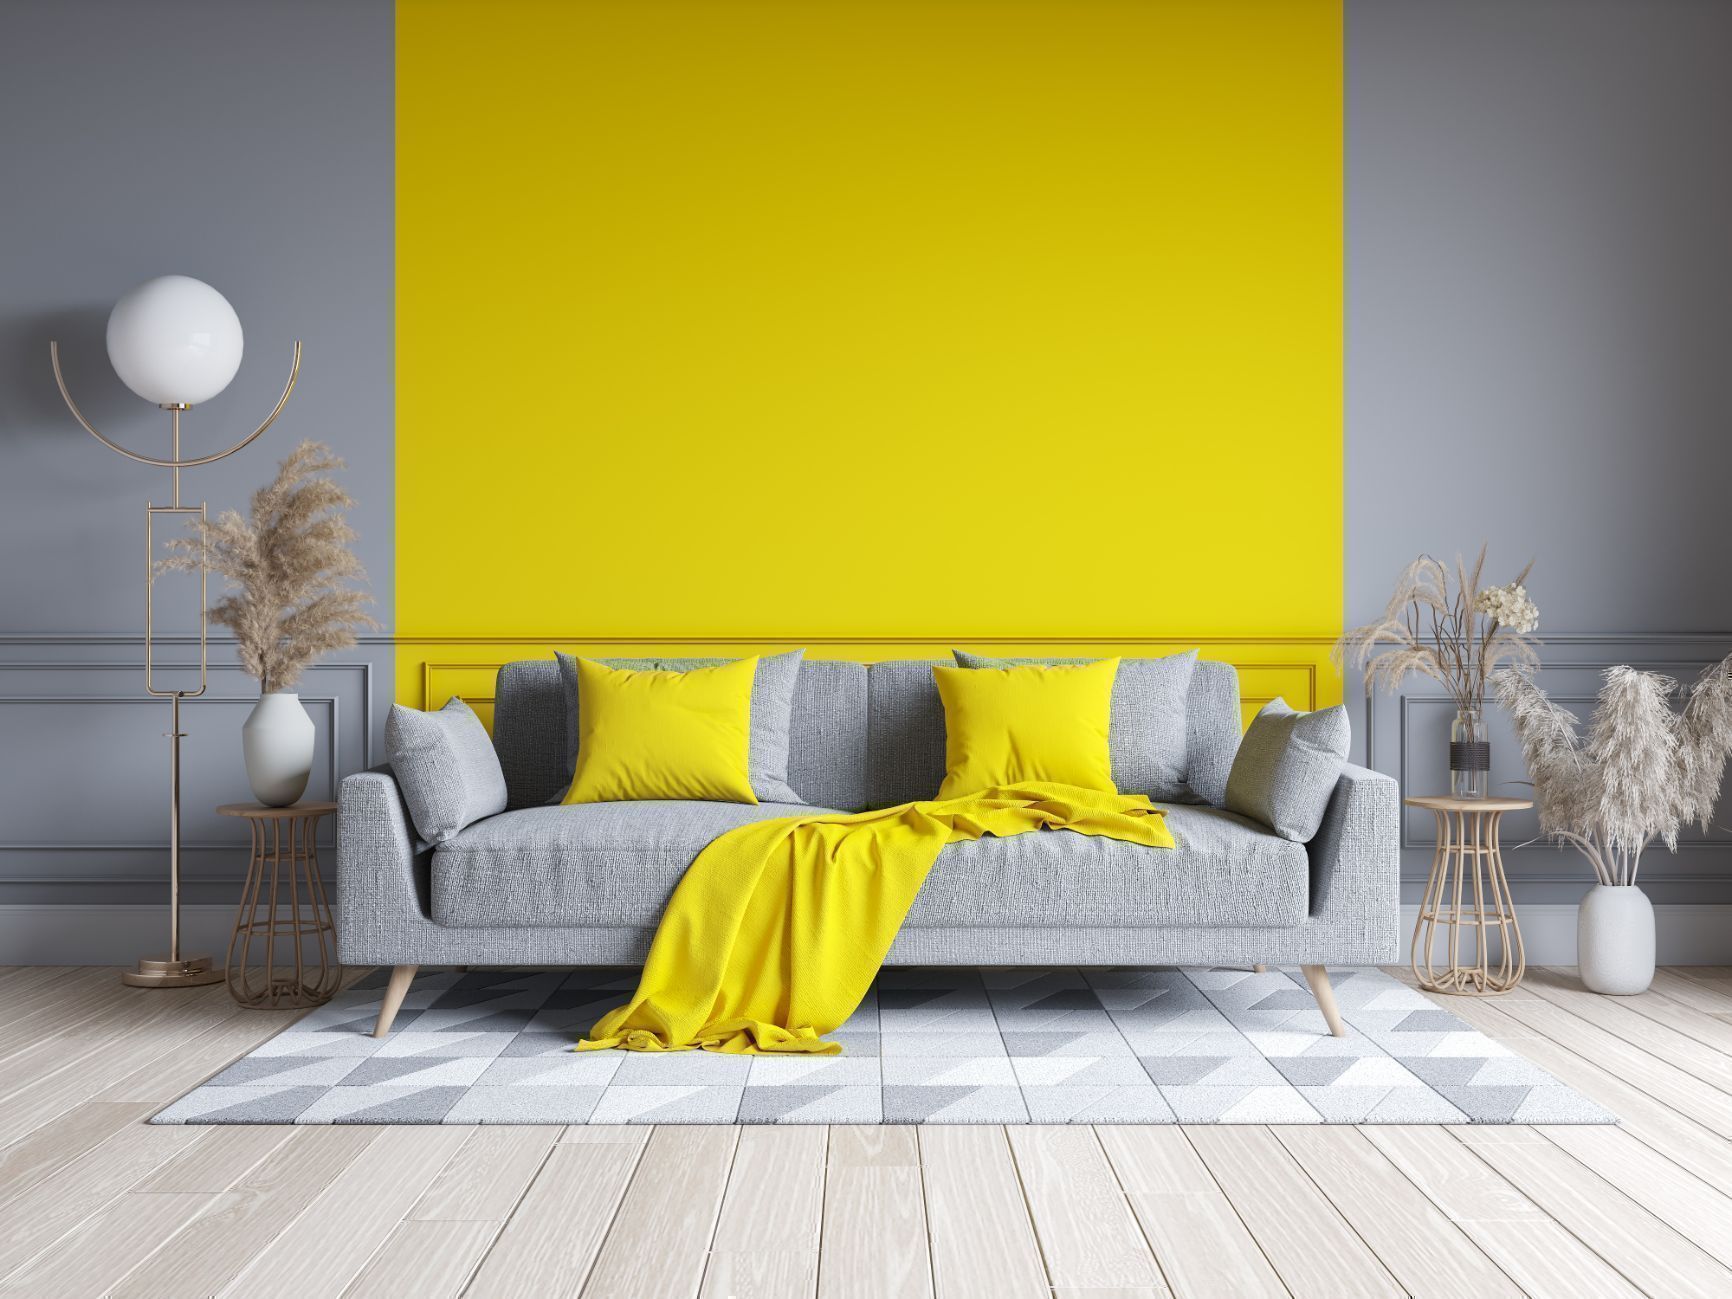 Stunning Wall Paint Design for Your Bedroom-Explore now and be inspired.